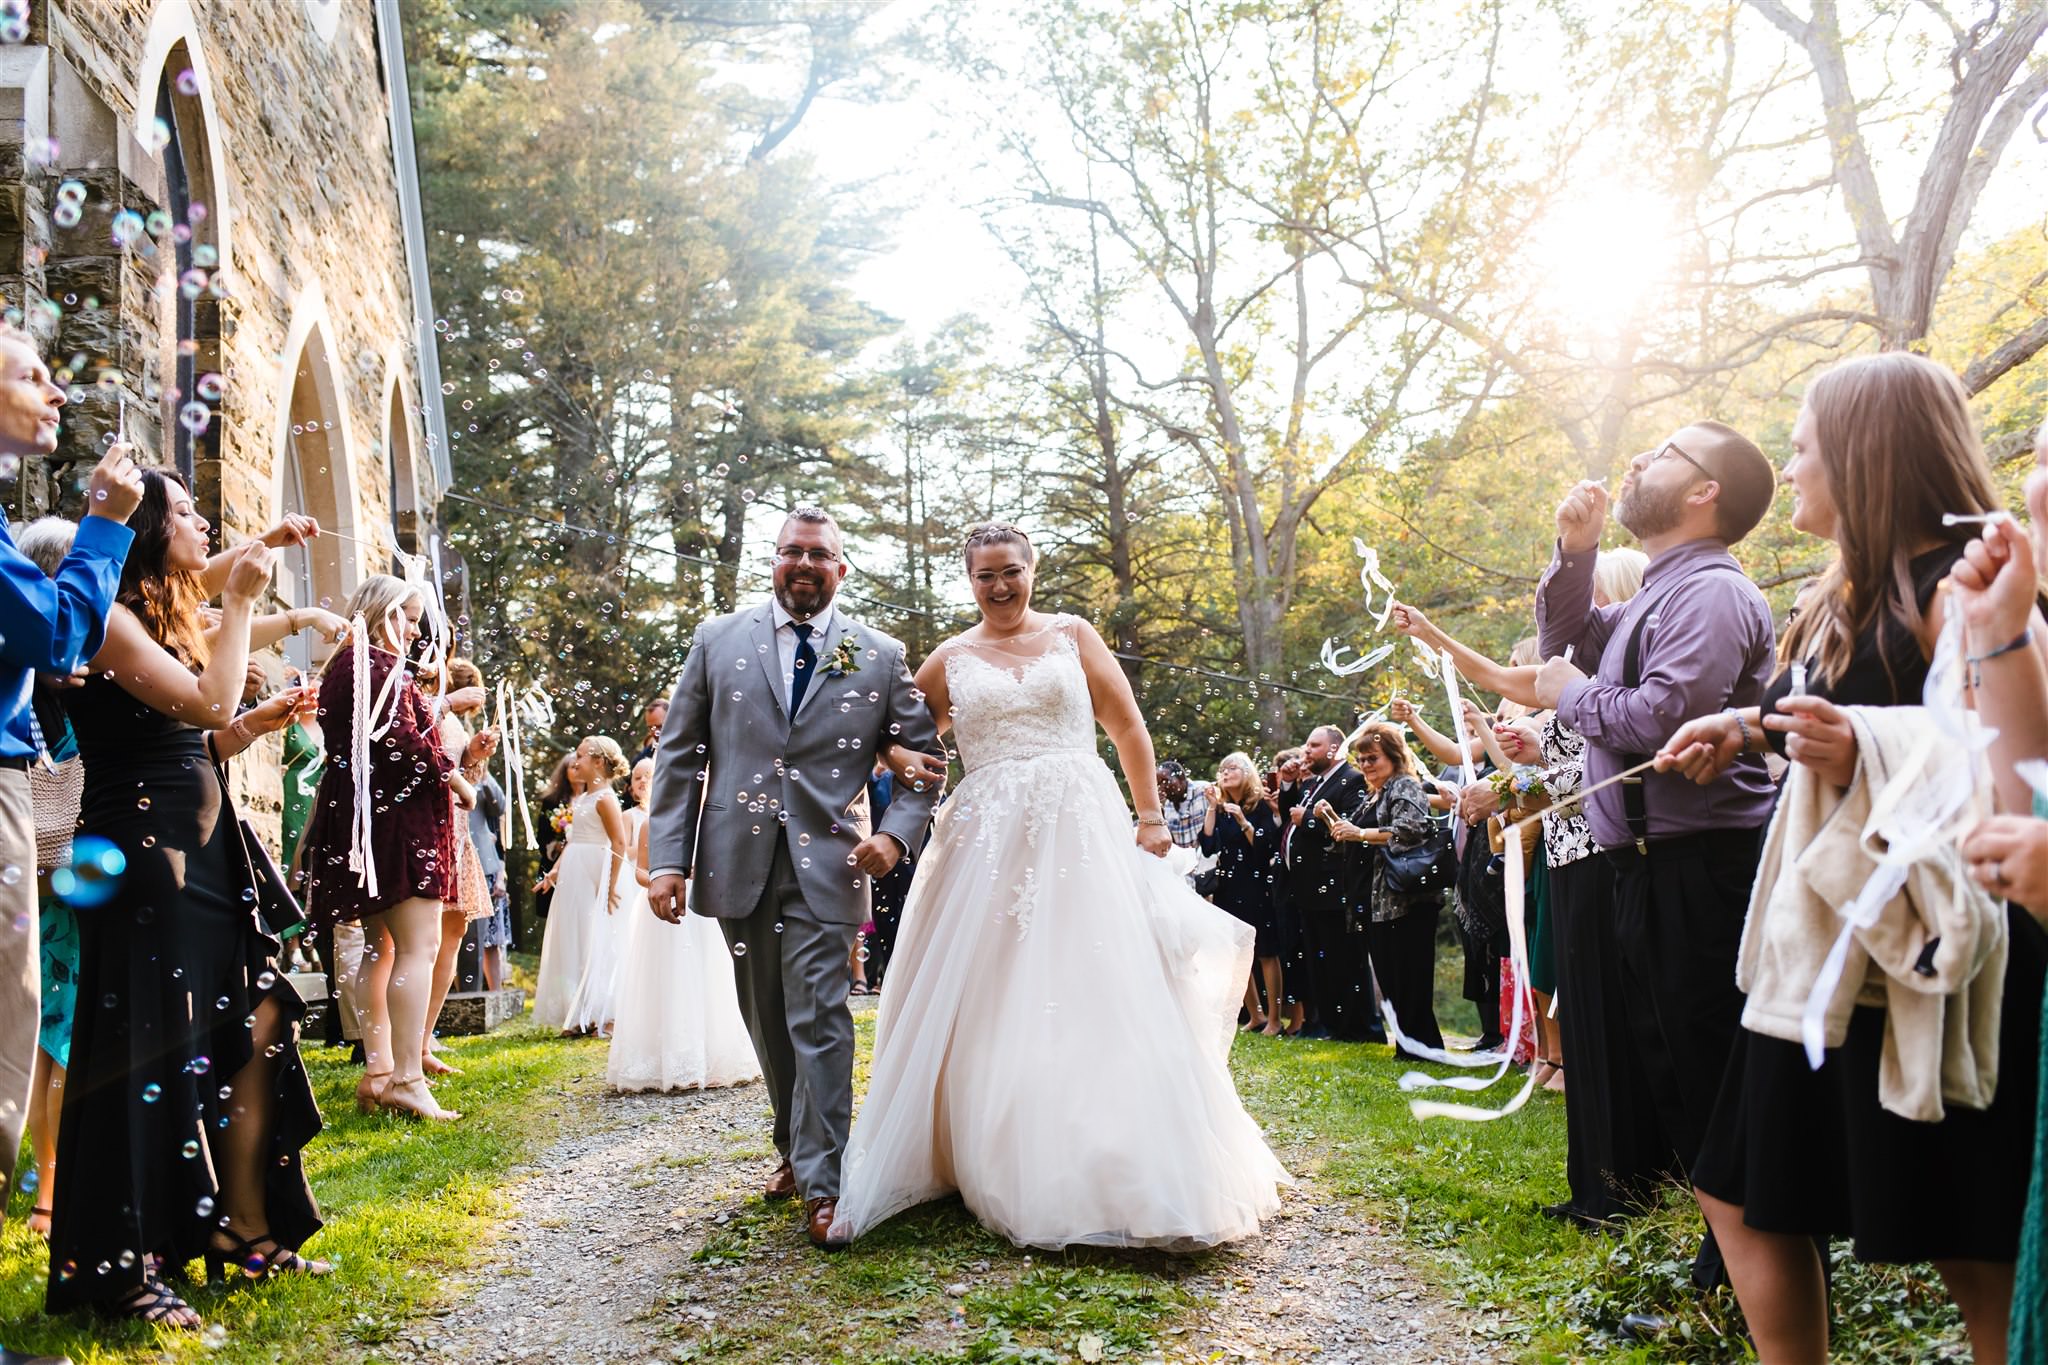 The bride and groom exit the chapel at the Fountainebleau Inn as guests blow bubbles at them.